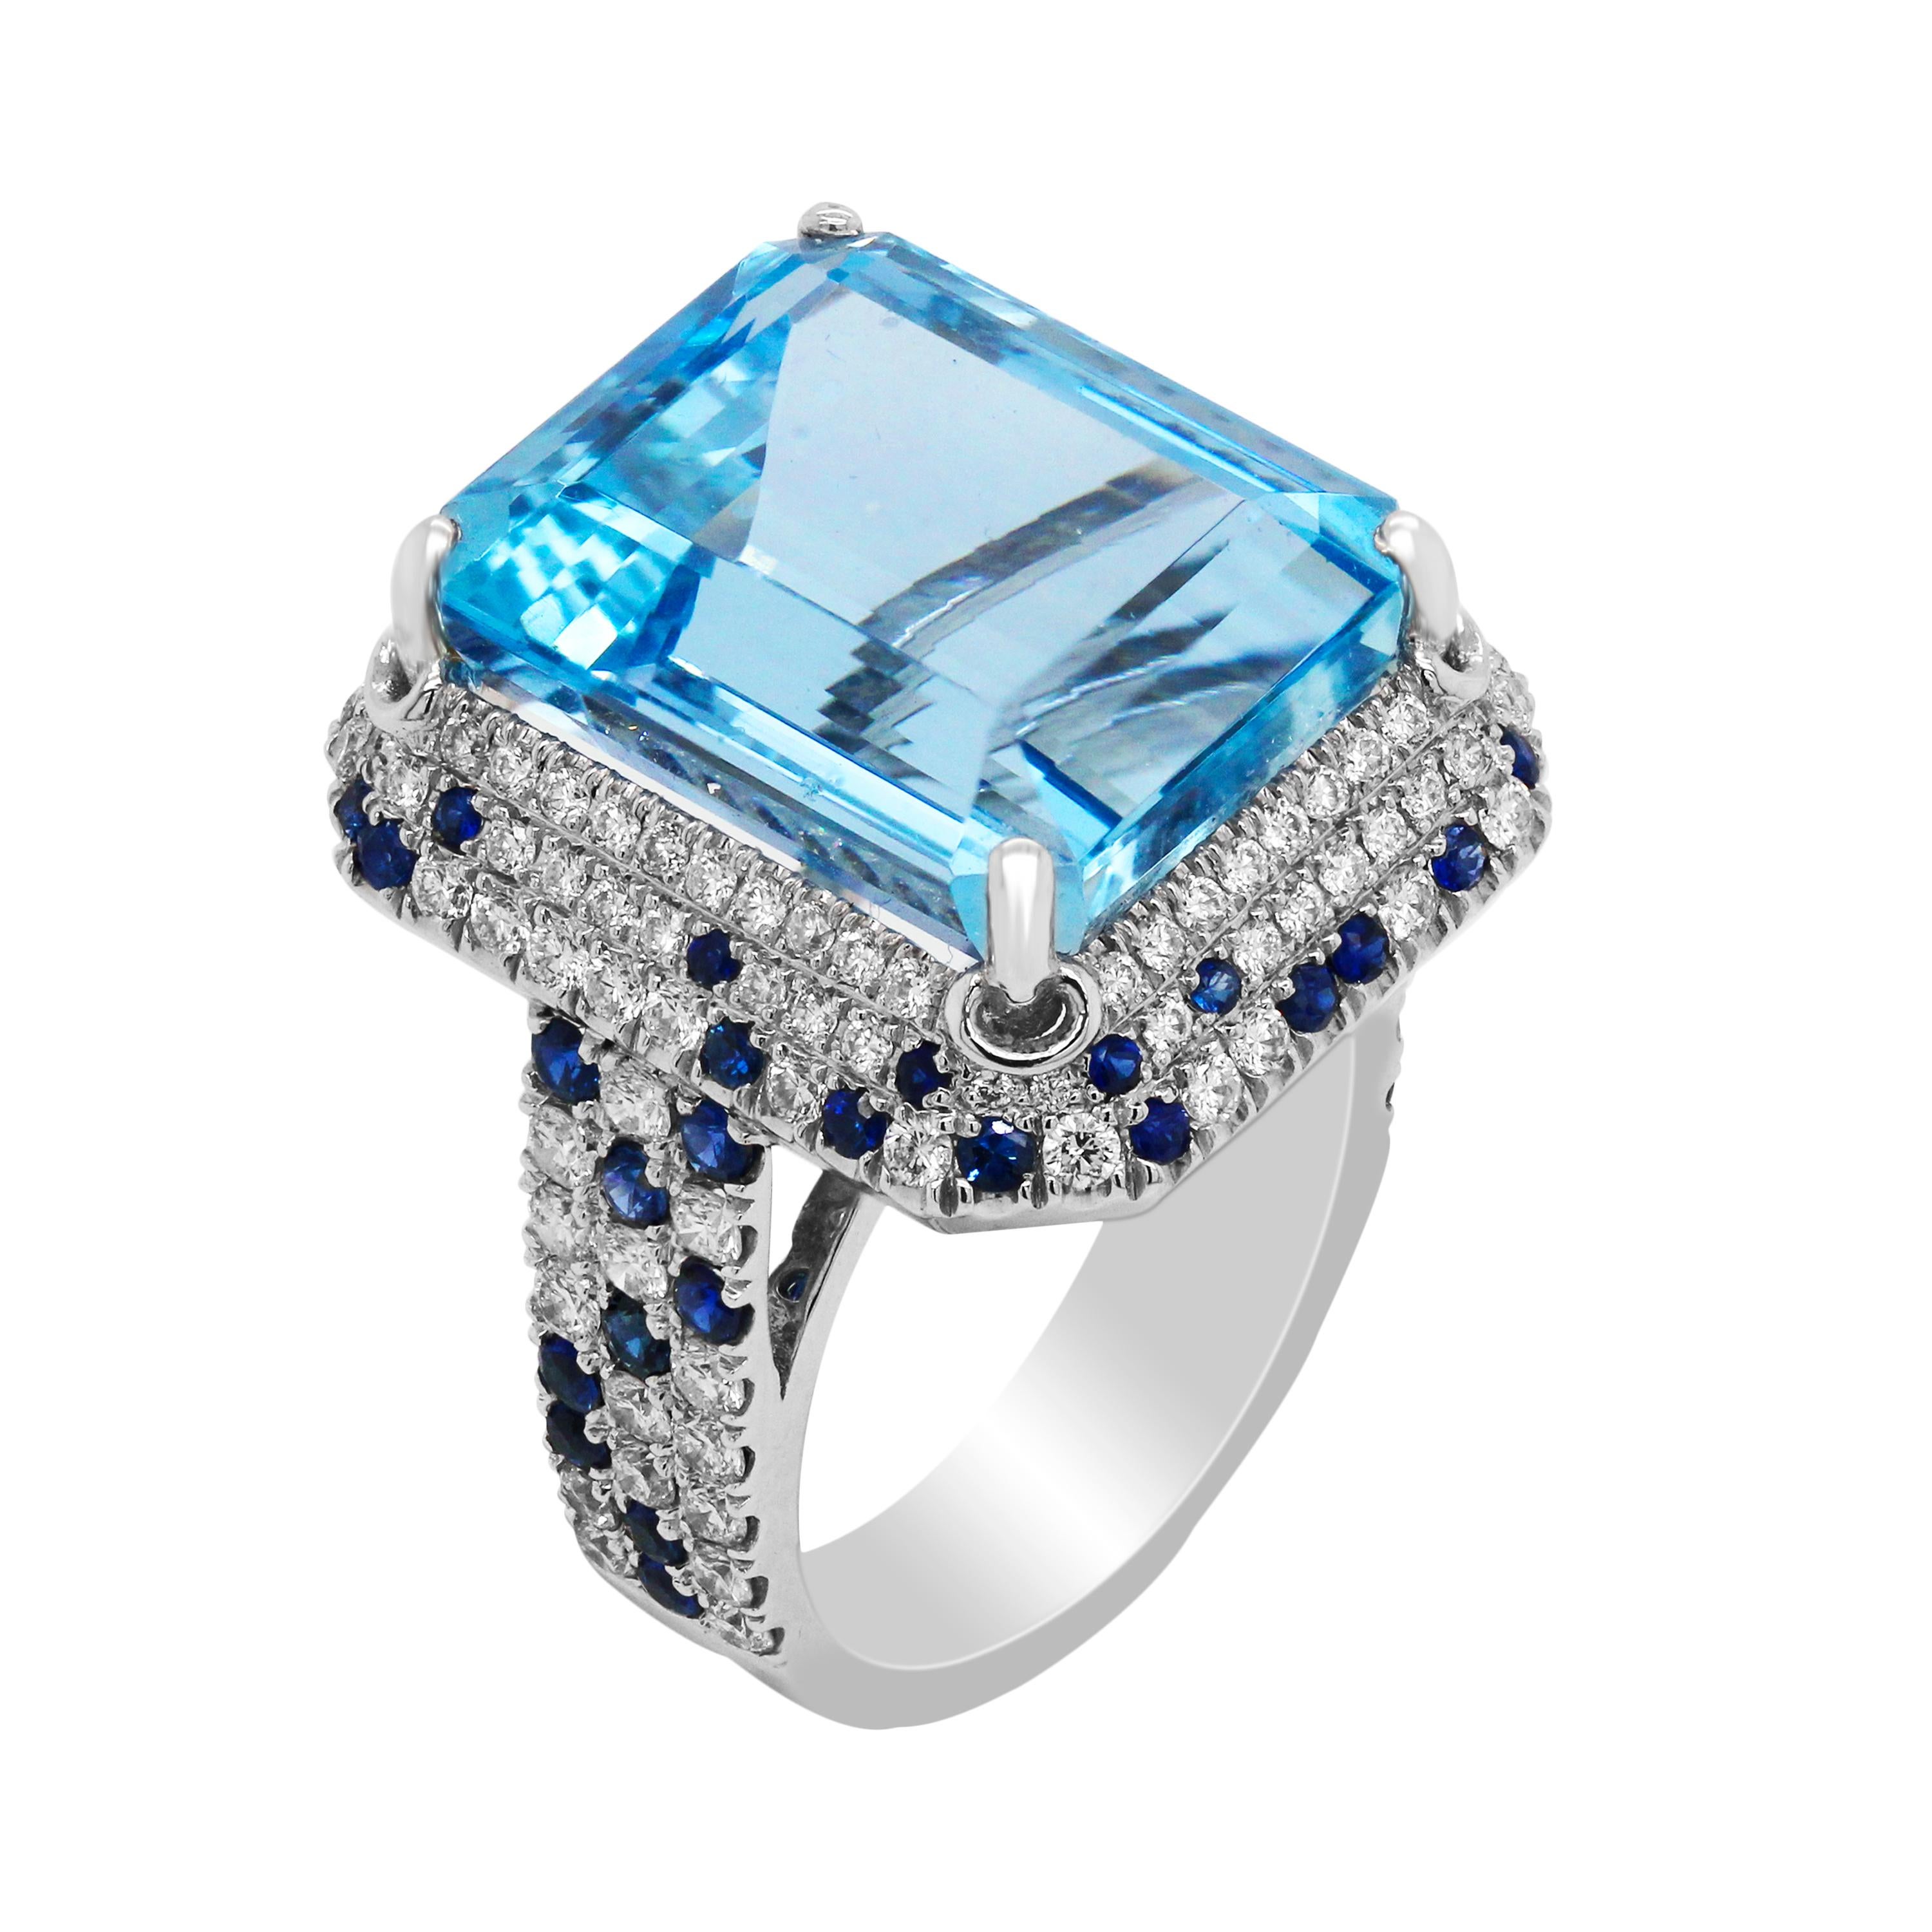 Emerald Cut Aquamarine Blue Sapphire Diamond 18K White Gold Ring

This ring features an excellent quality Aquamarine center, emerald-cut. Ring is done entirely in solid 18K Gold and set with diamonds with touches of blue sapphires all